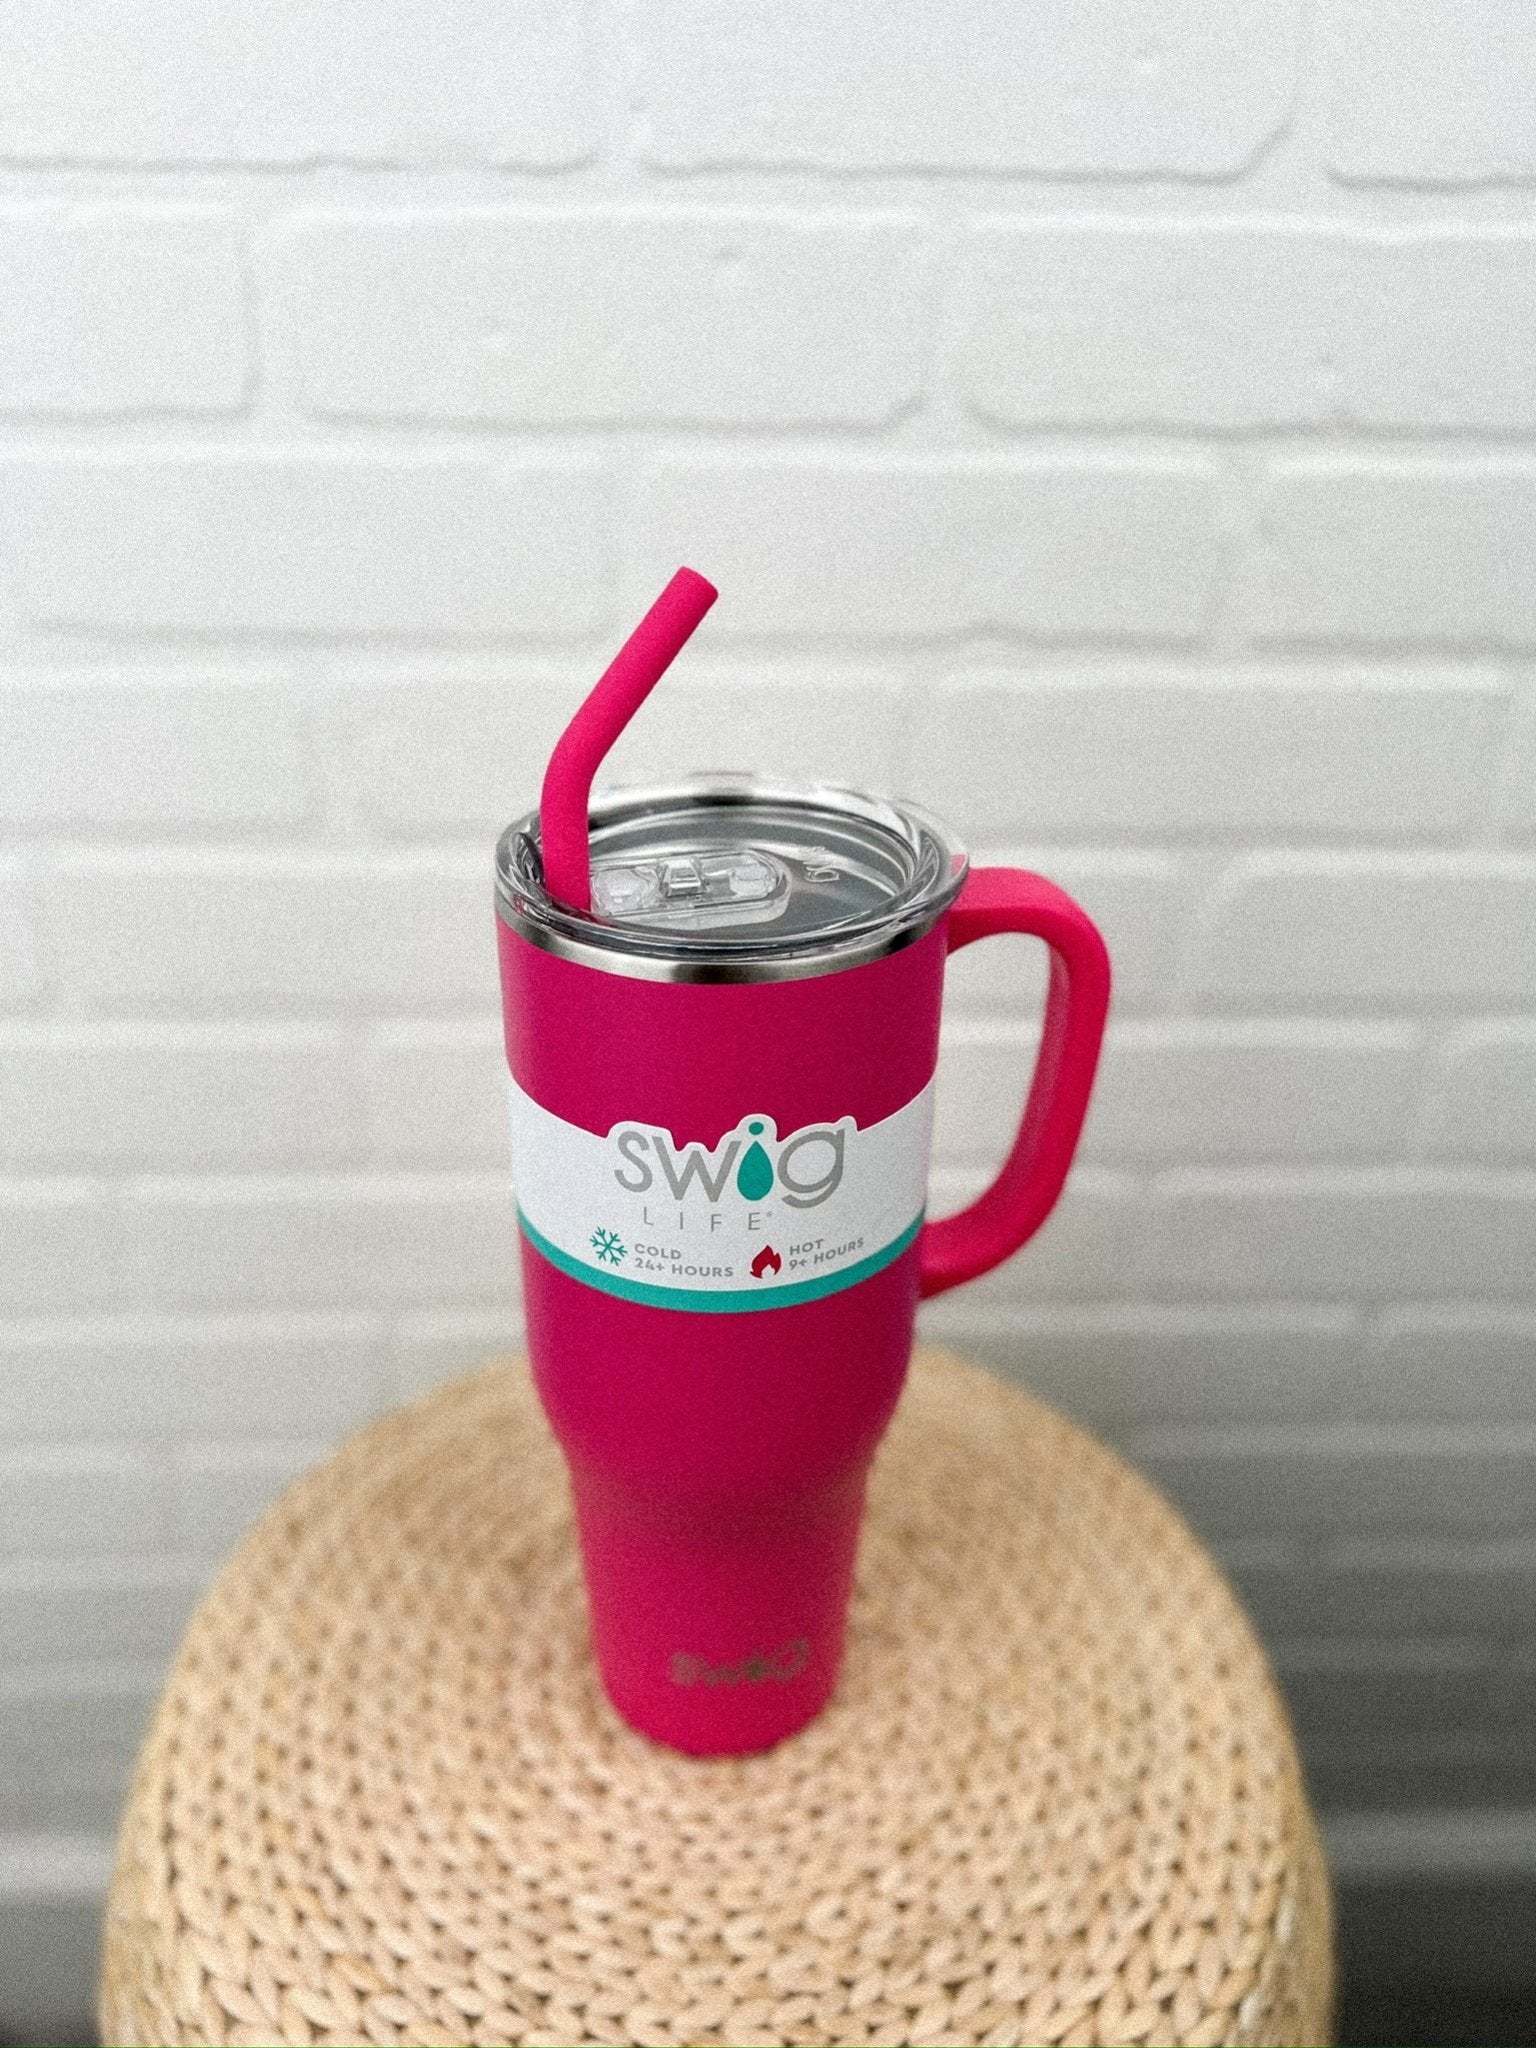 Swig hot pink 40oz tumbler - Trendy Tumblers, Mugs and Cups at Lush Fashion Lounge Boutique in Oklahoma City